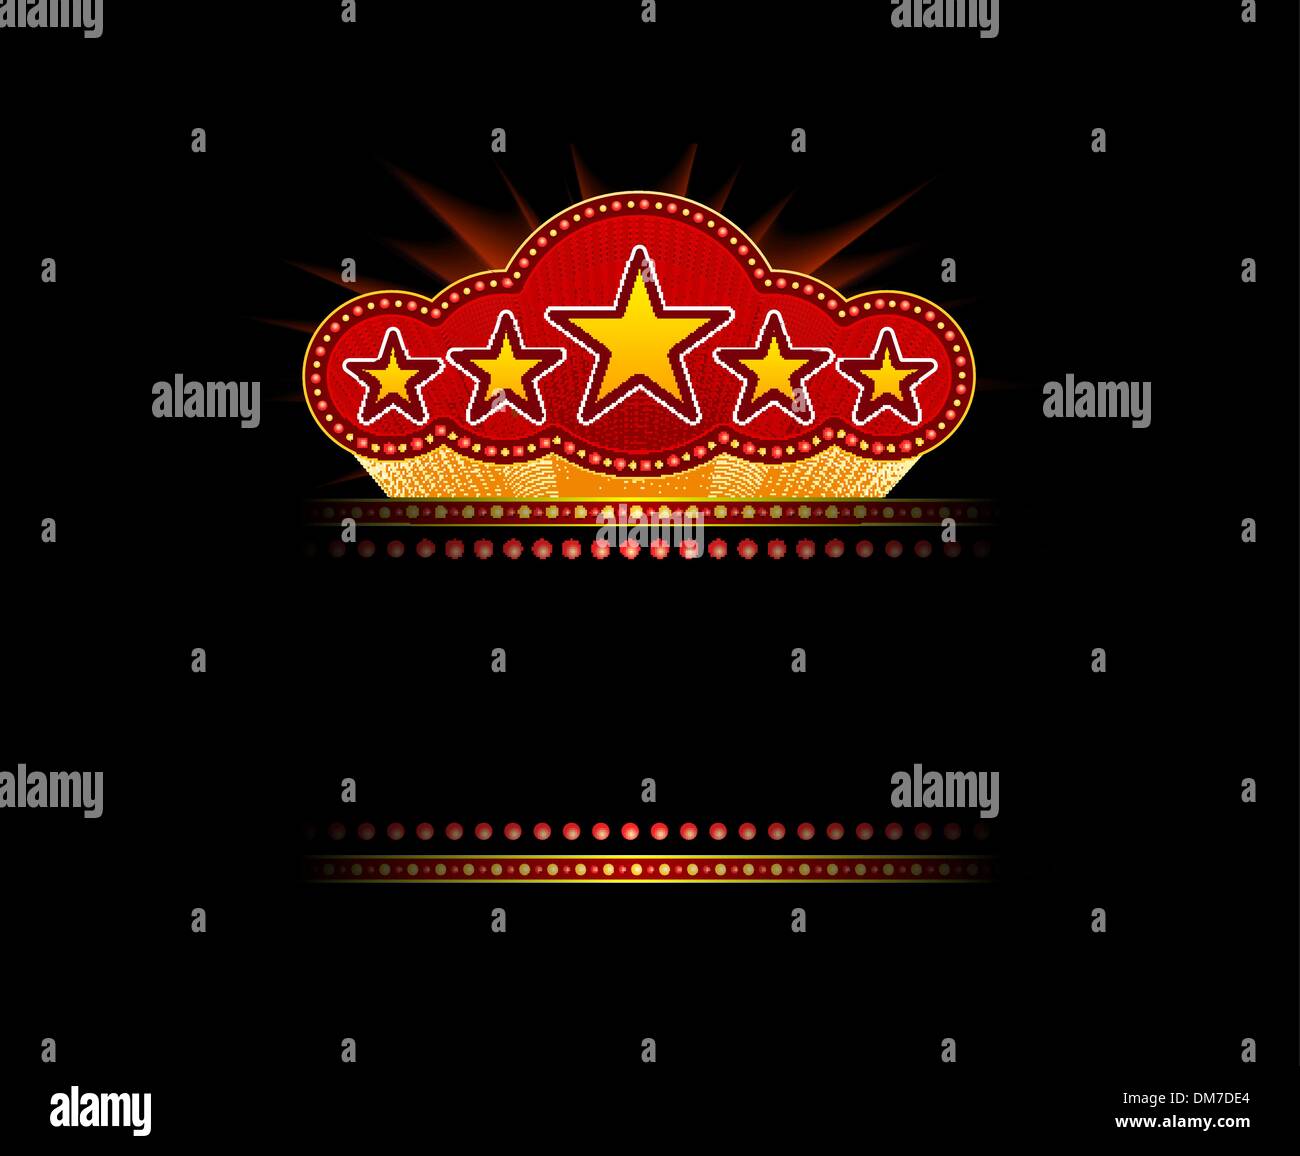 Blank movie, theater or casino marquee Stock Vector